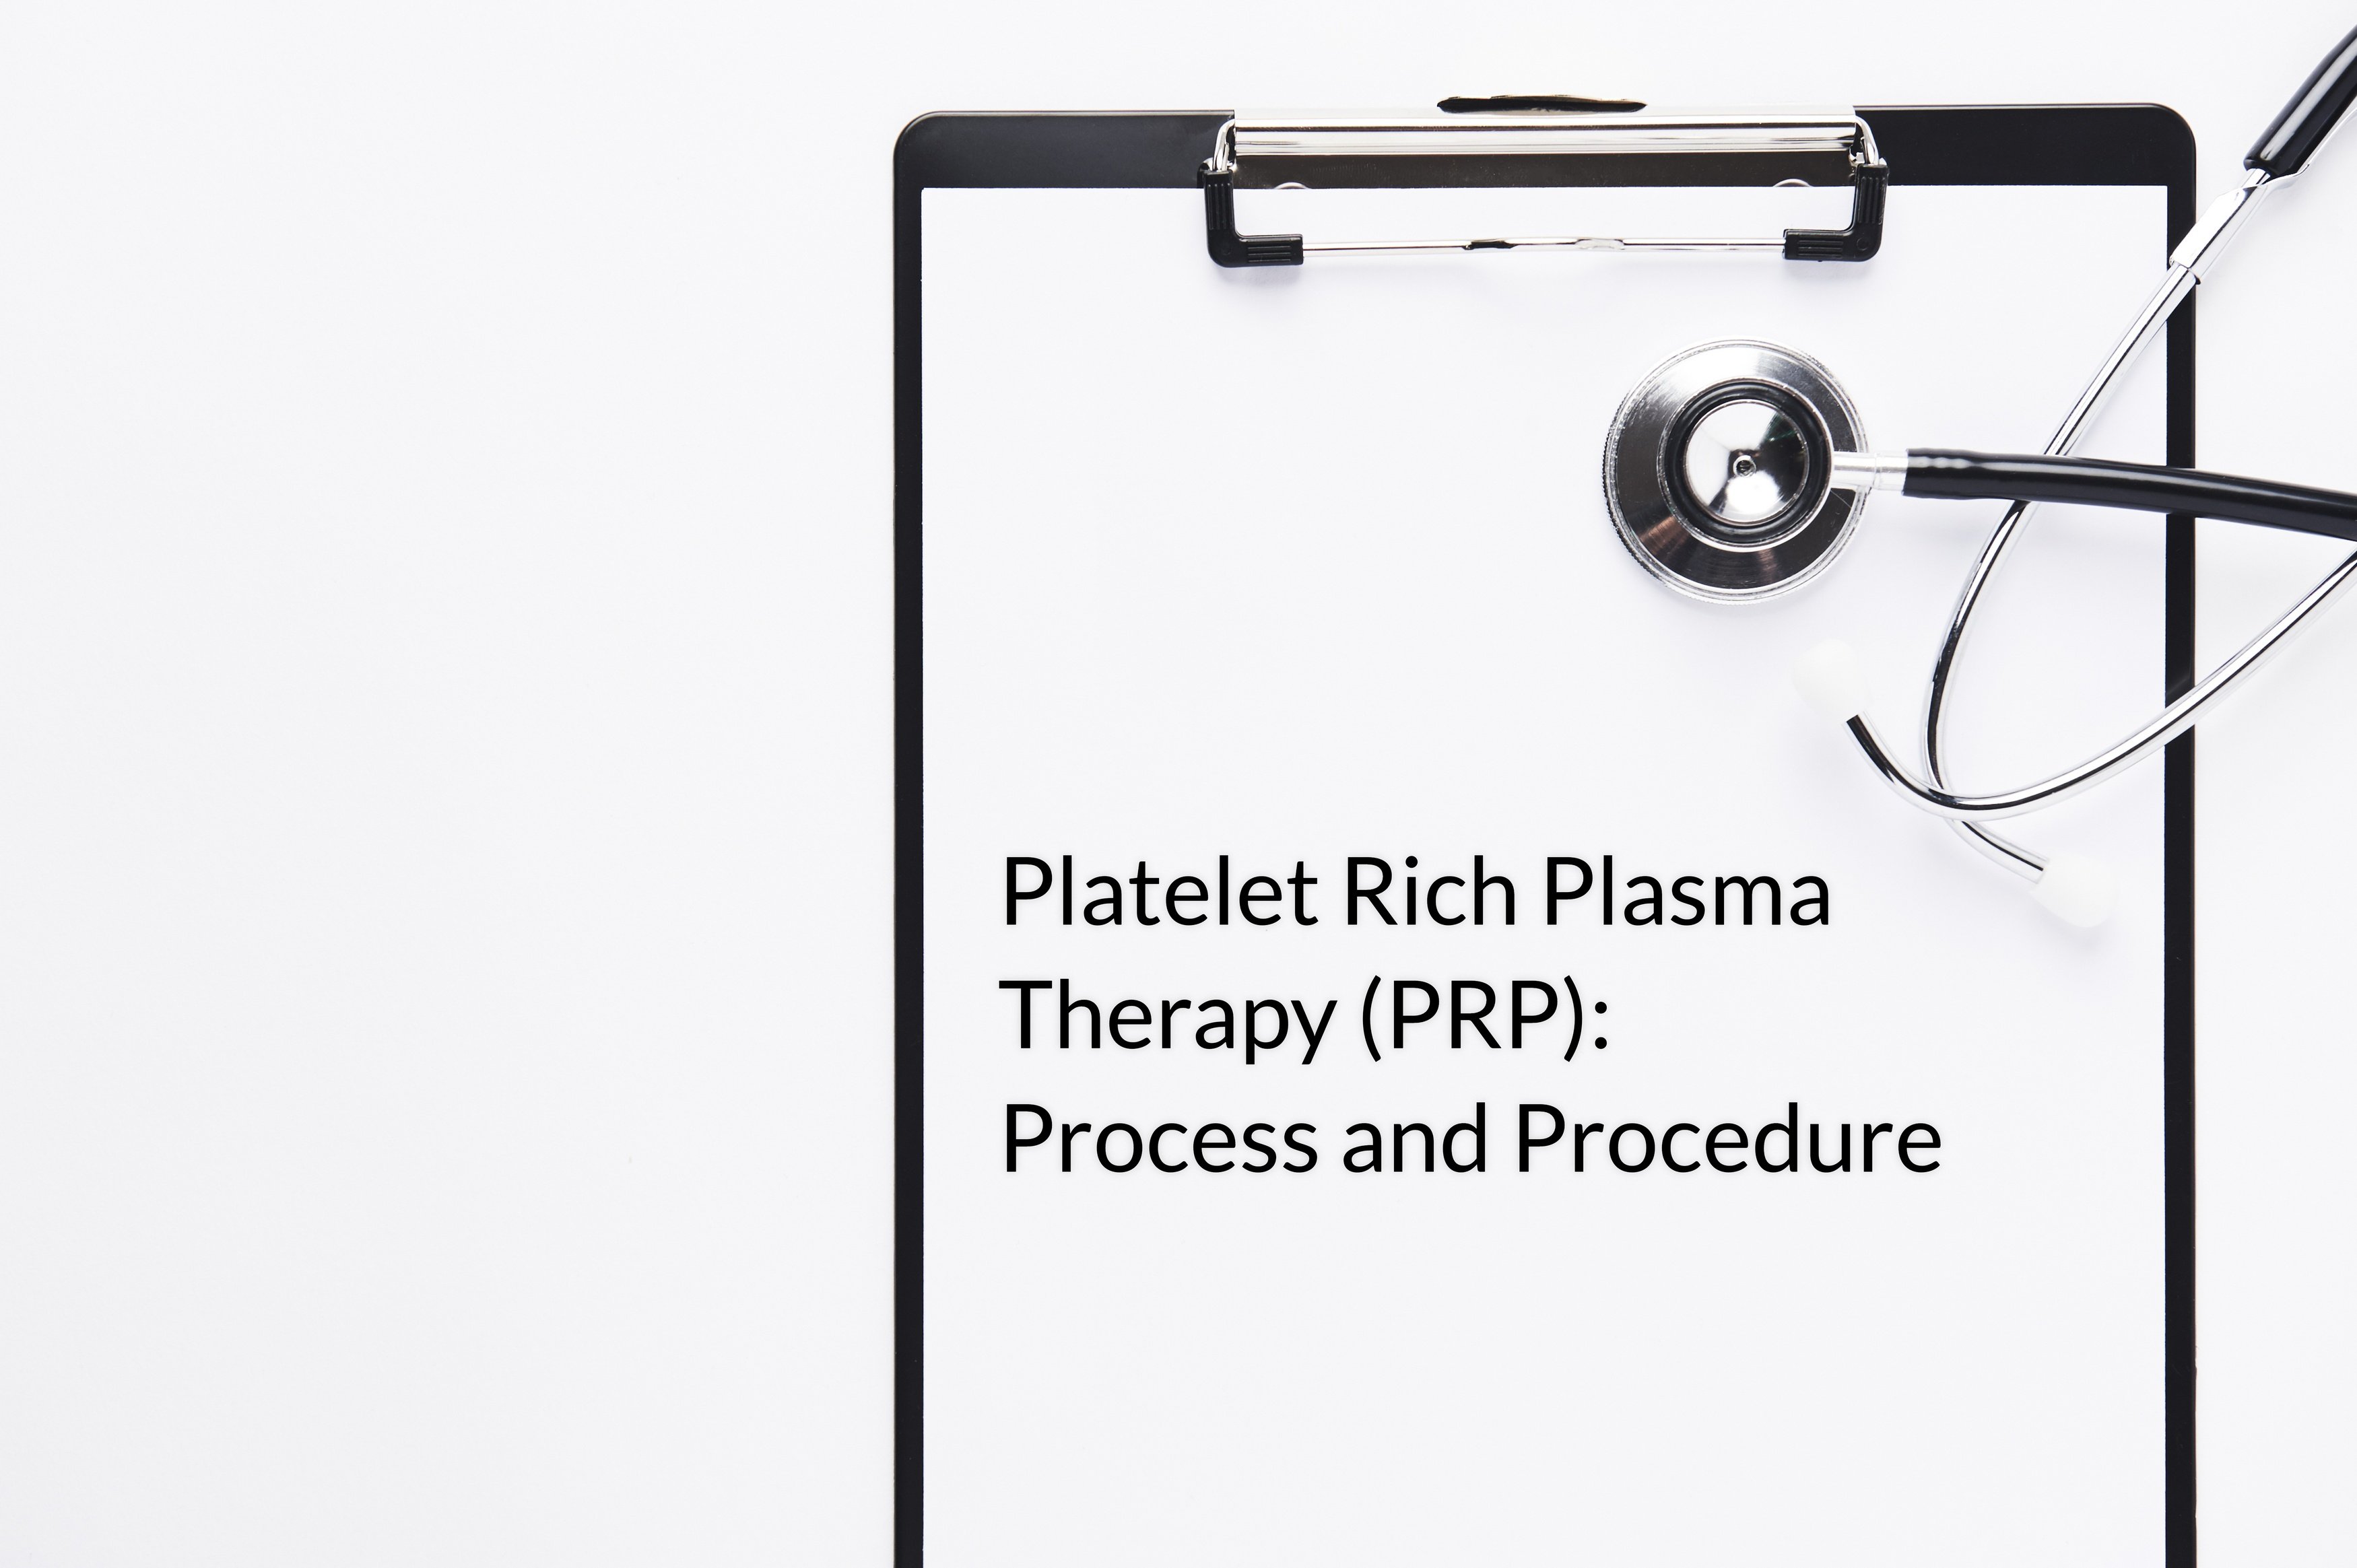 process for prp therapy and procedures